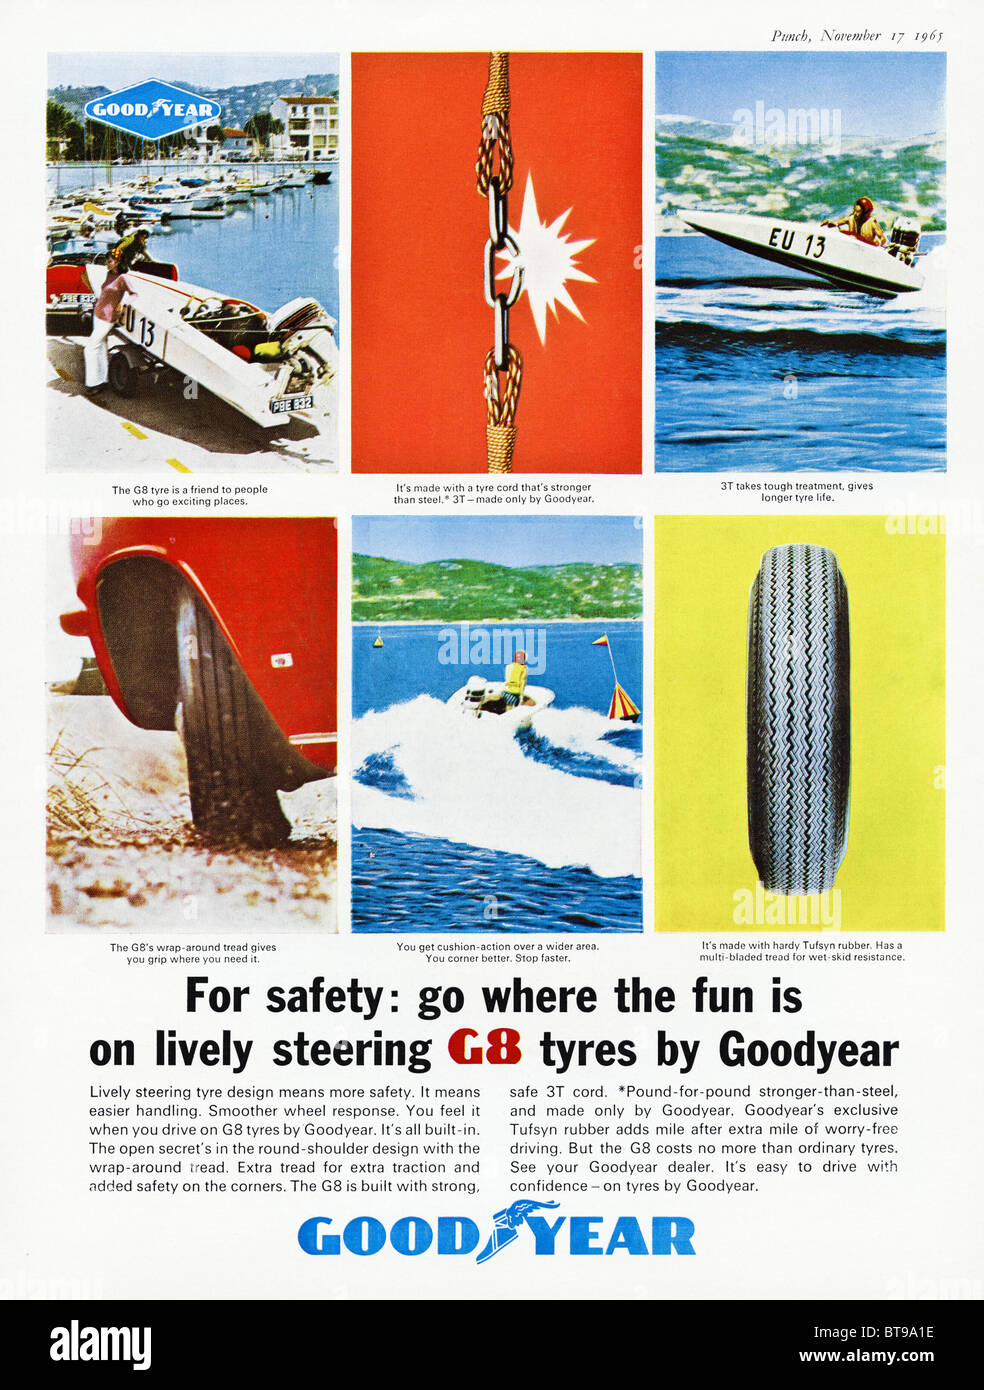 Advert for Goodyear G8 tyres in magazine dated 17th November 1965 Stock Photo